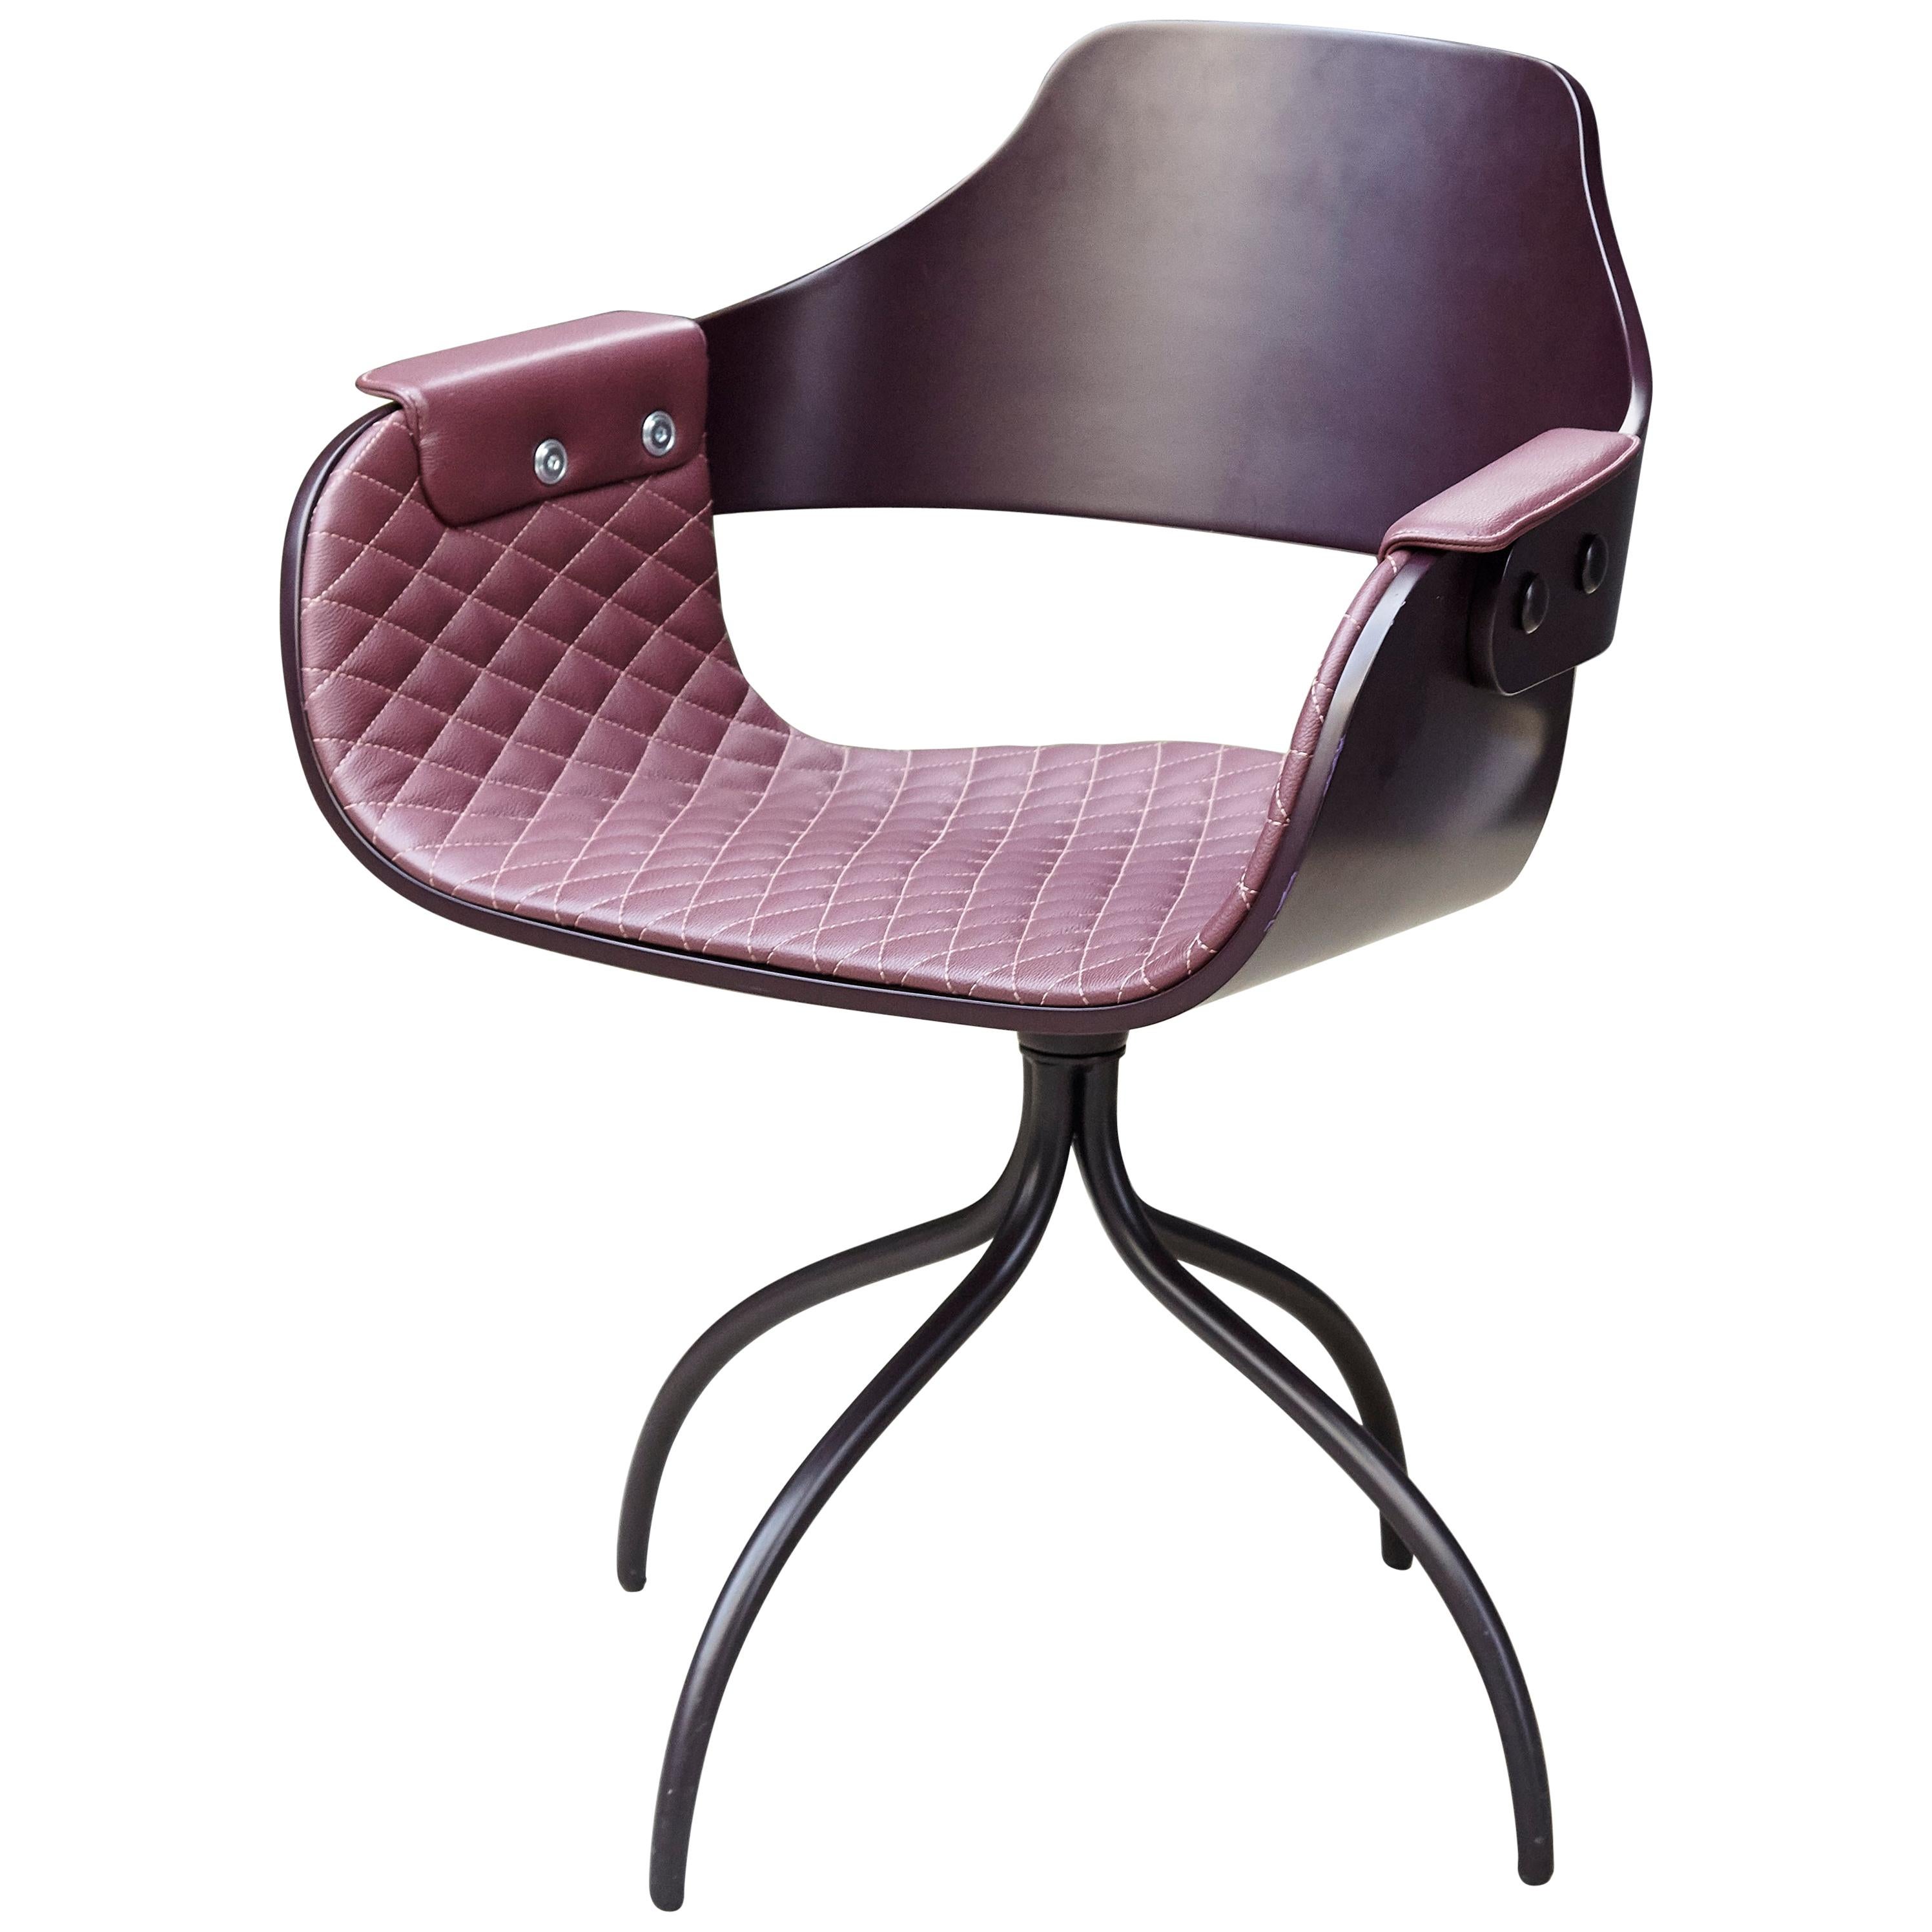 Jaime Hayon, Contemporary Upholstered Purple Wood Chair Showtime by BD Barcelona